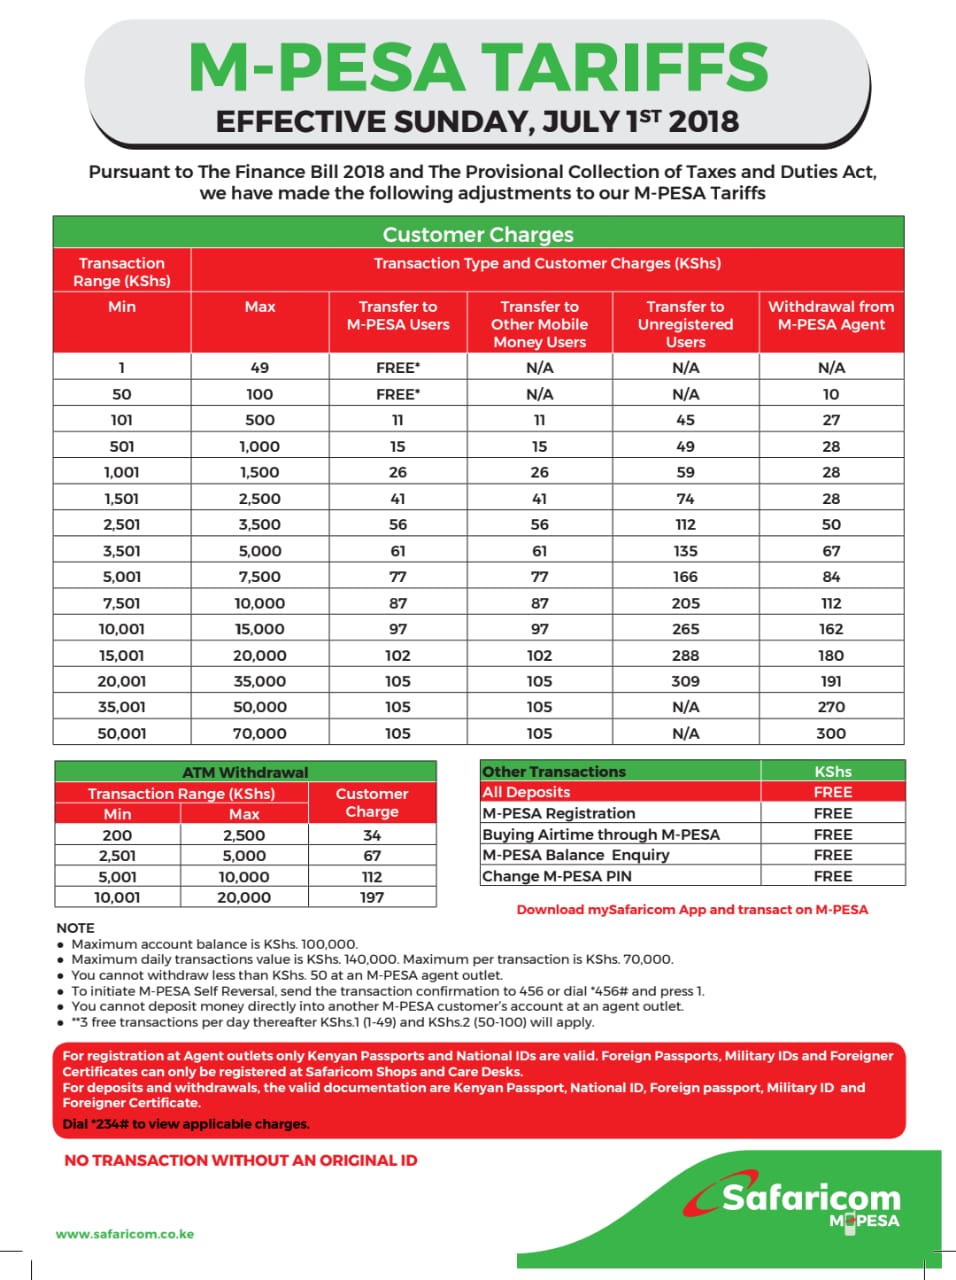 The new MPesa charges introduced by